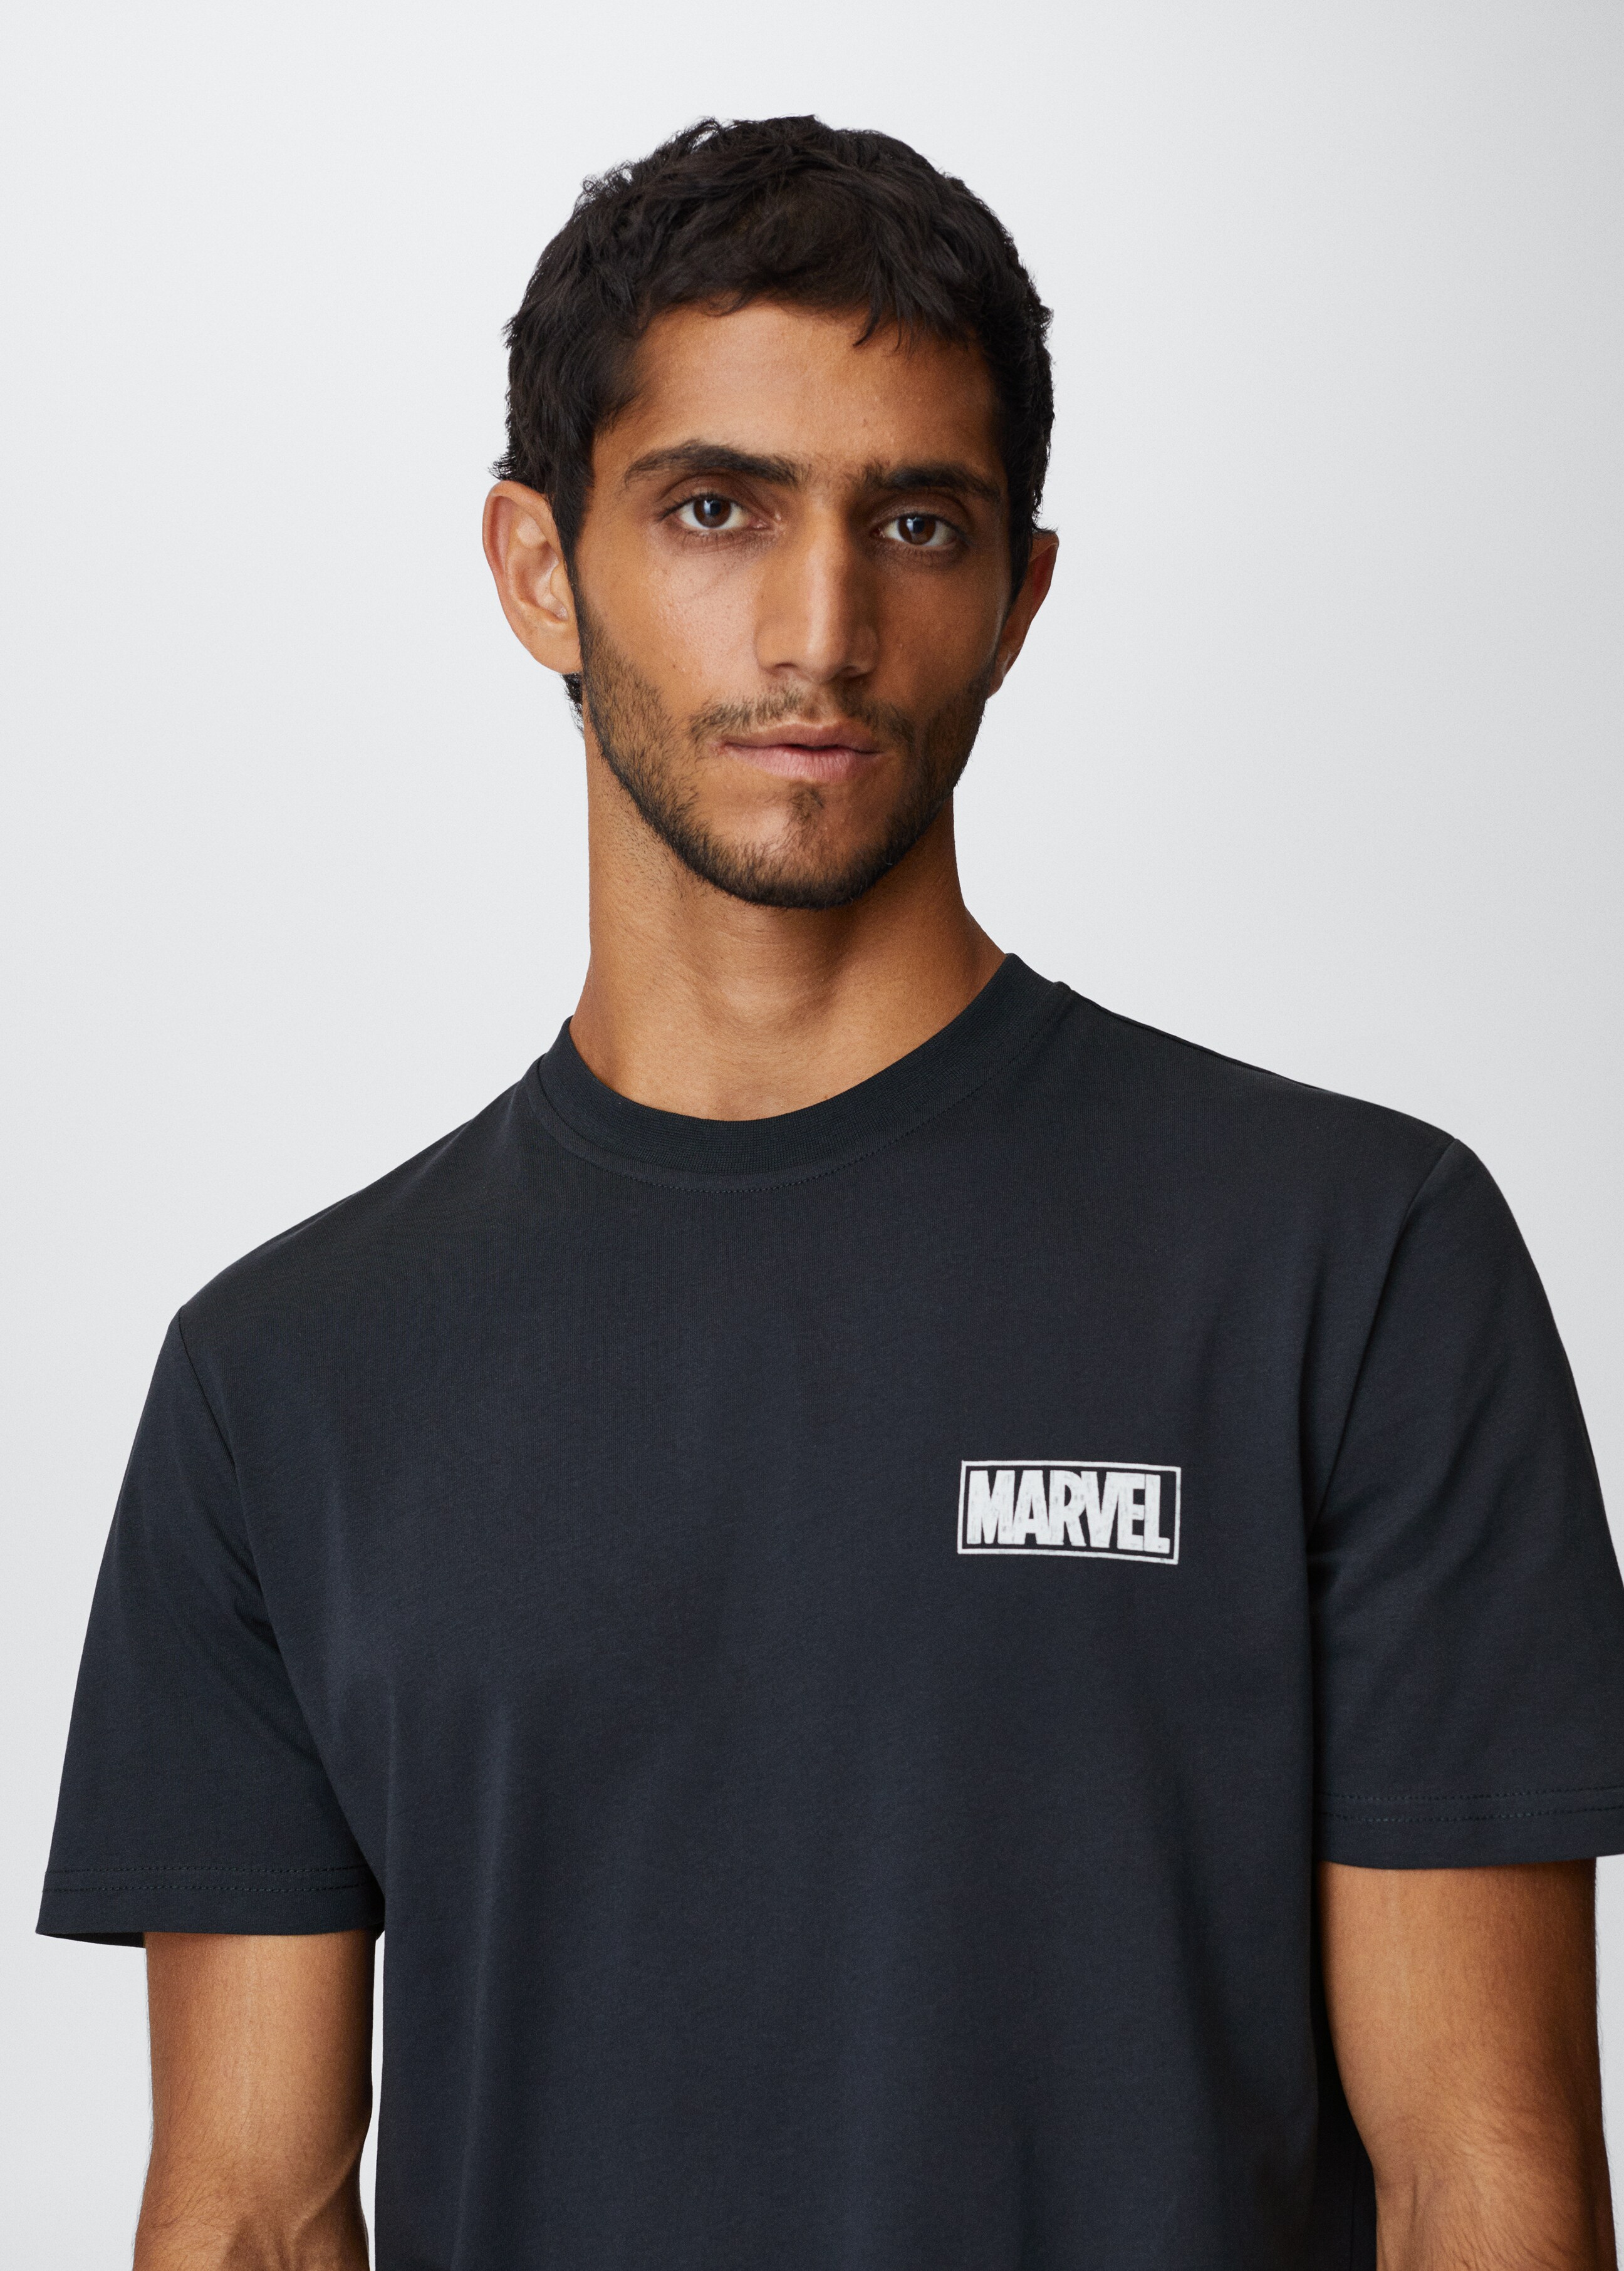 Marvel cotton T-shirt - Details of the article 4